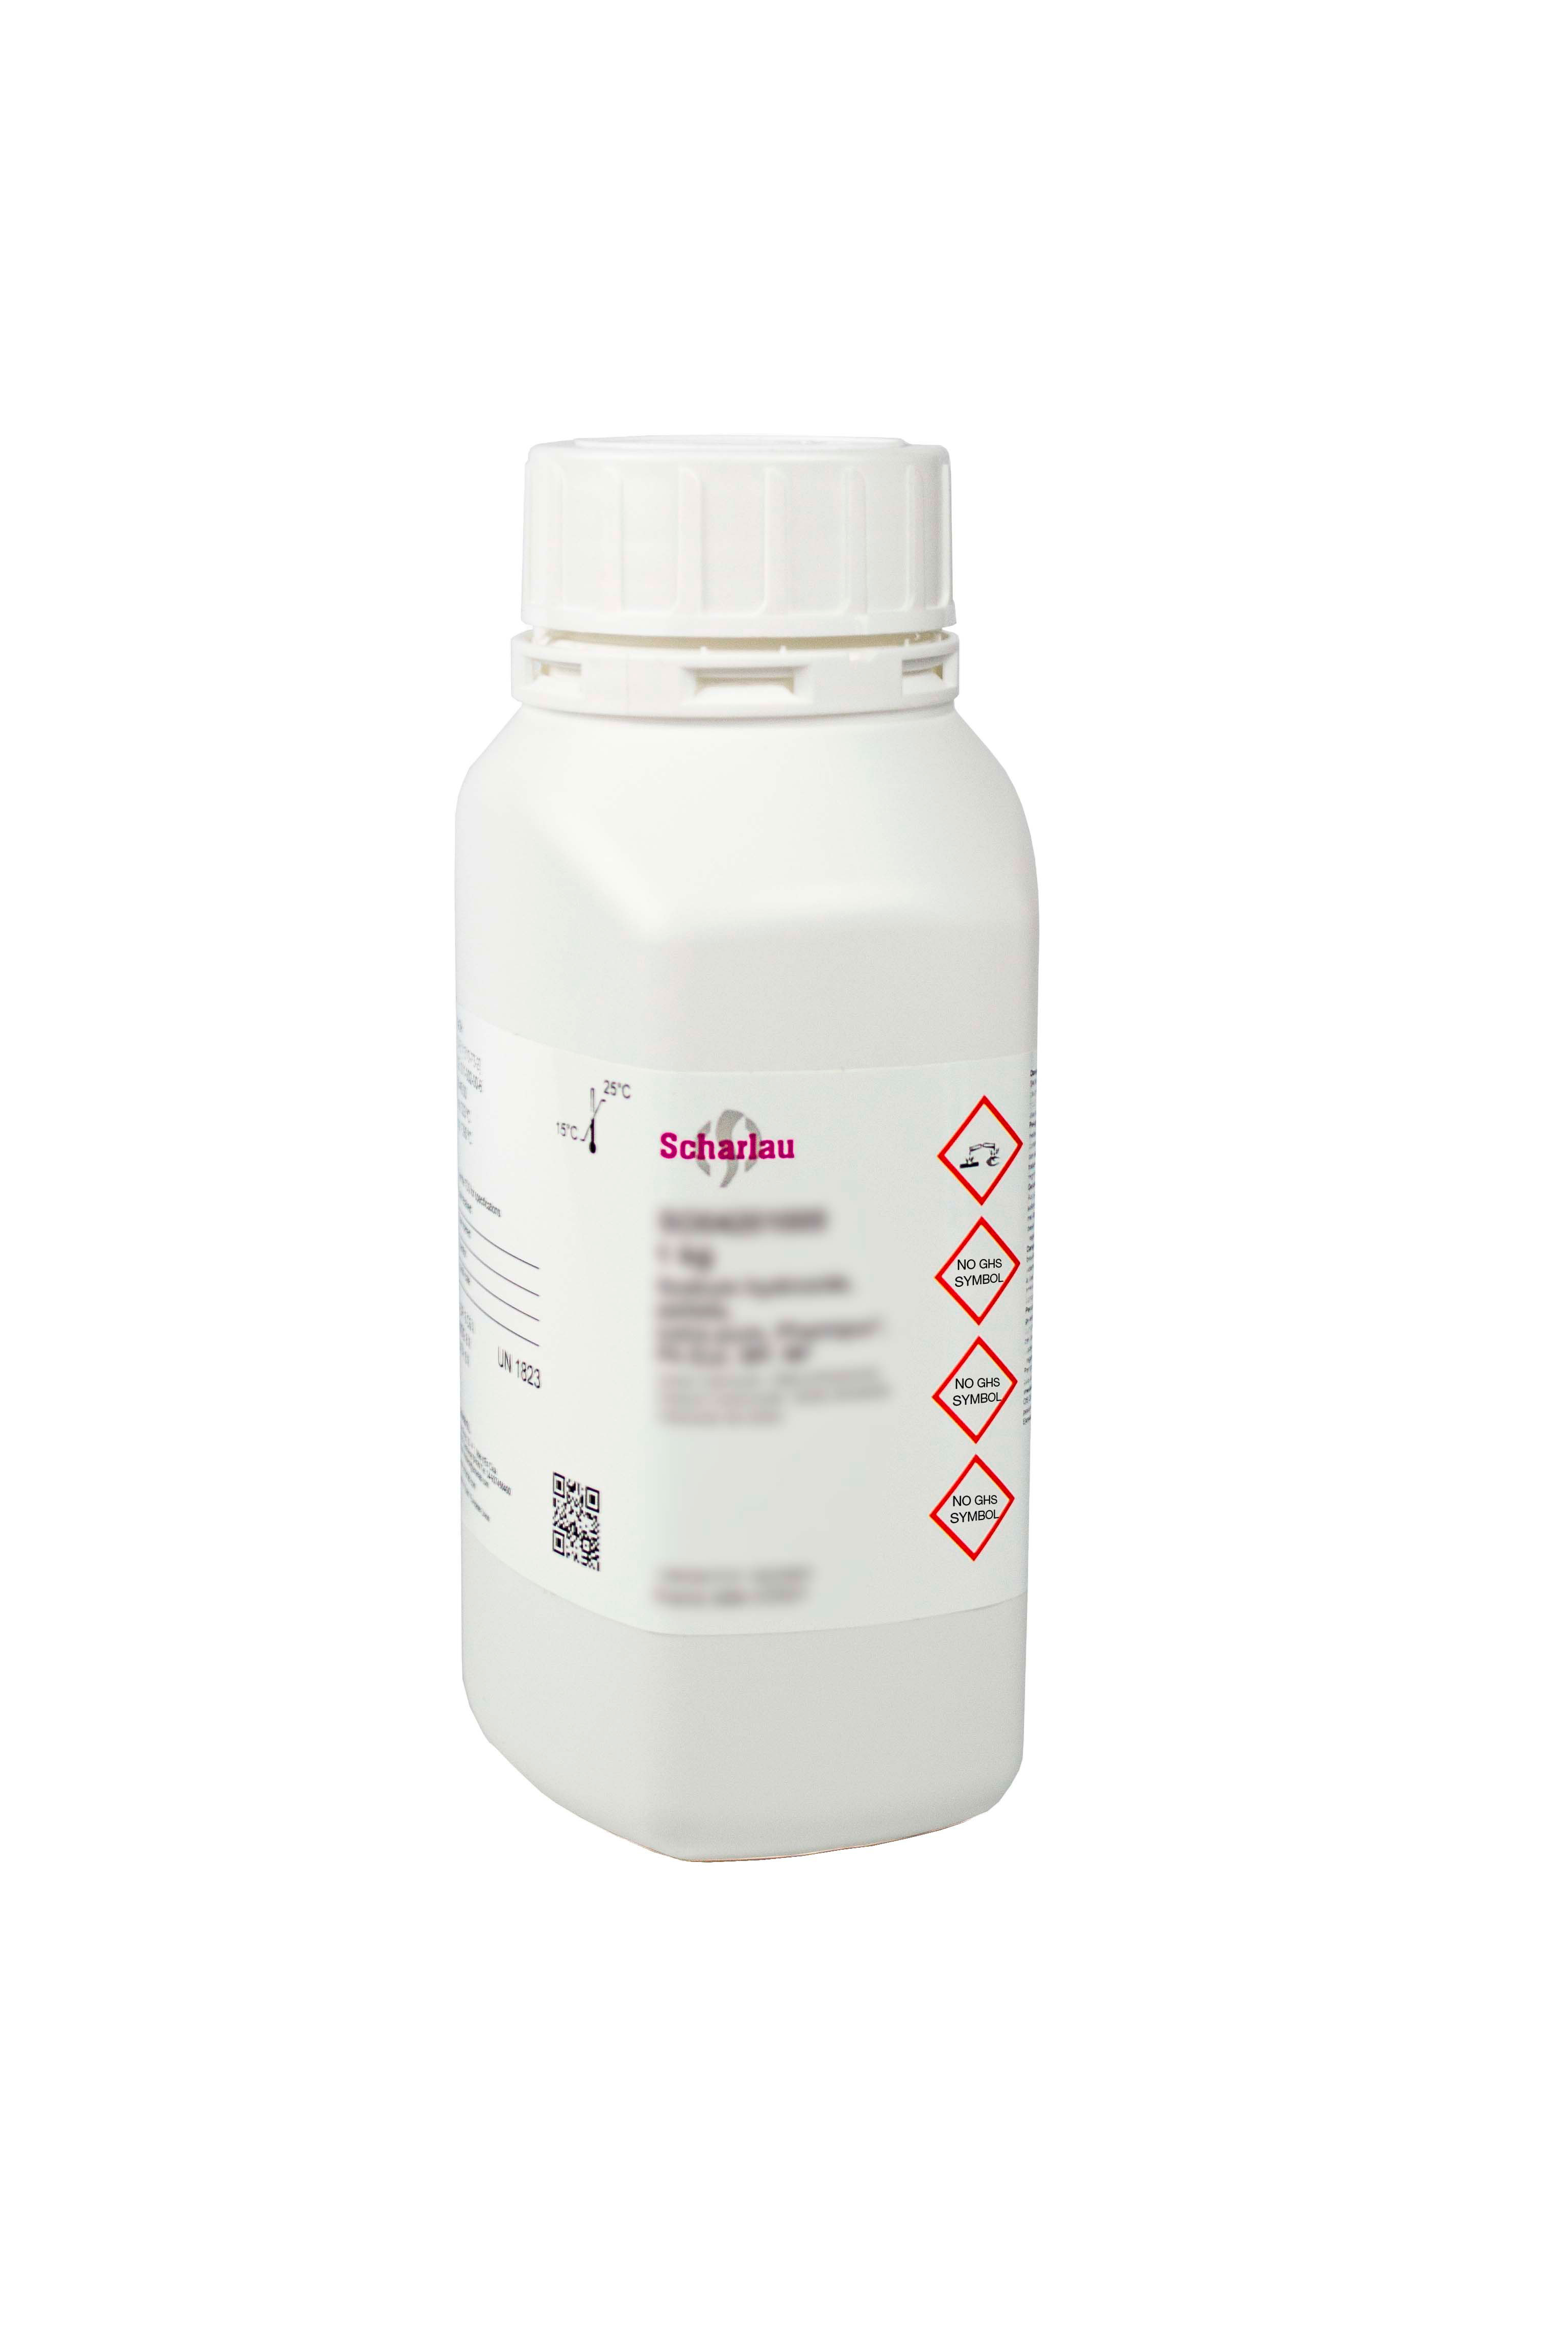 di-Sodium hydrogen phosphate dihydrate, for analysis, ExpertQ®, Reag. Ph Eur